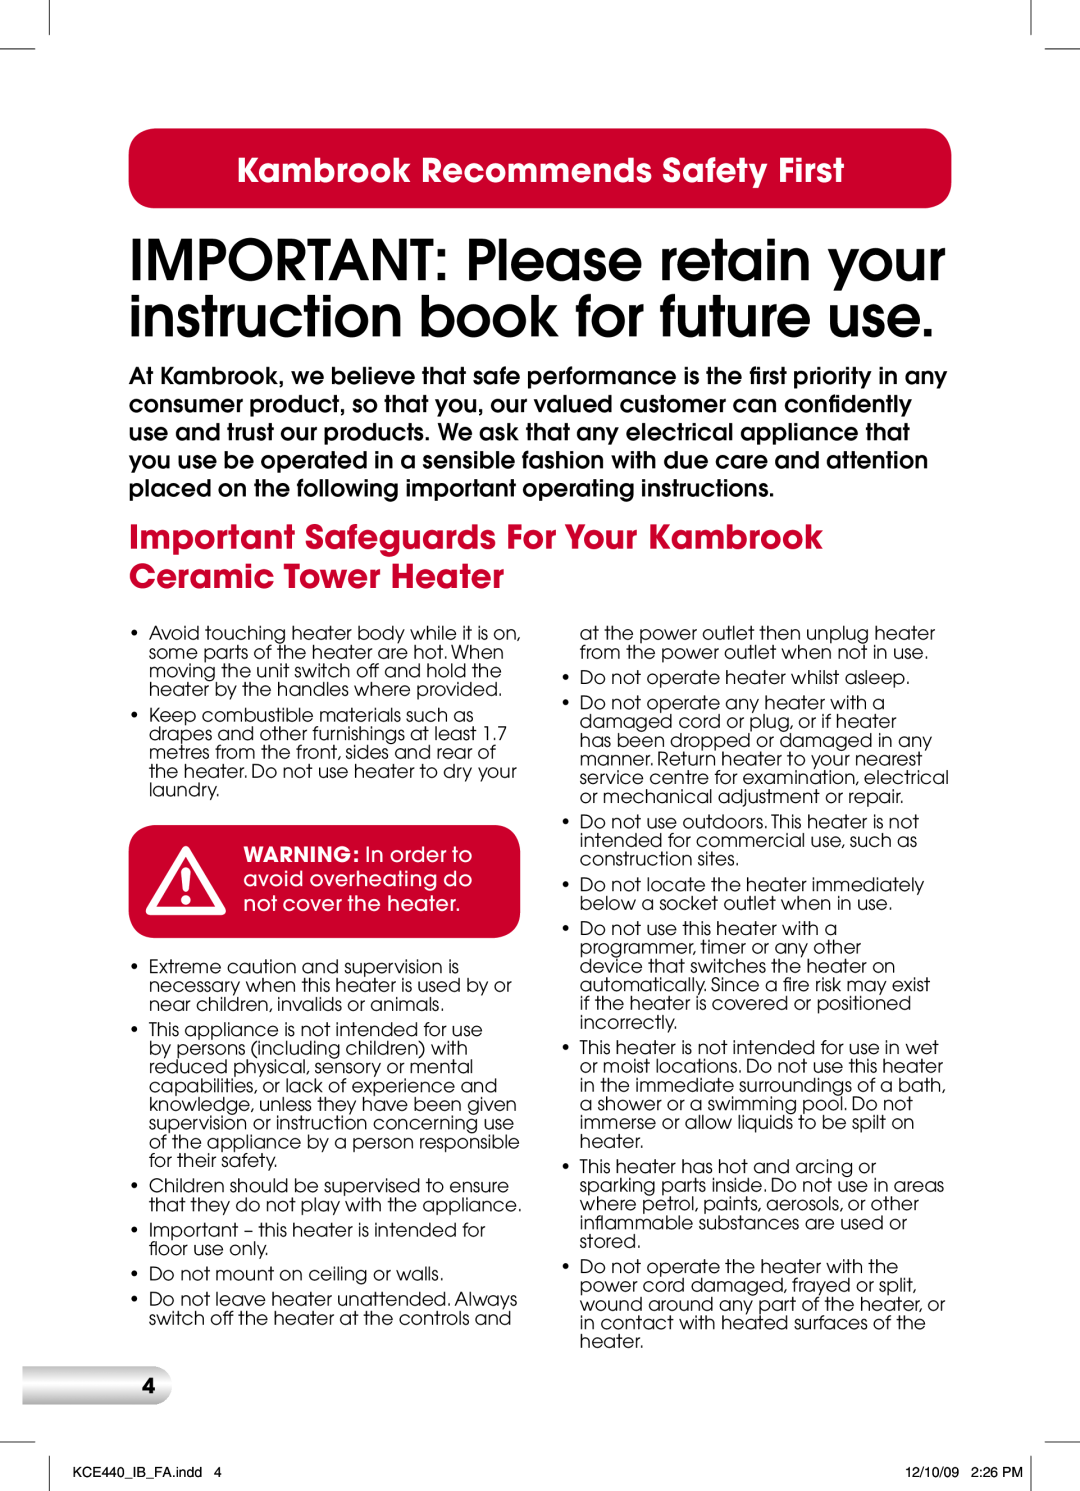 Kambrook KCE440 manual Kambrook Recommends Safety First 